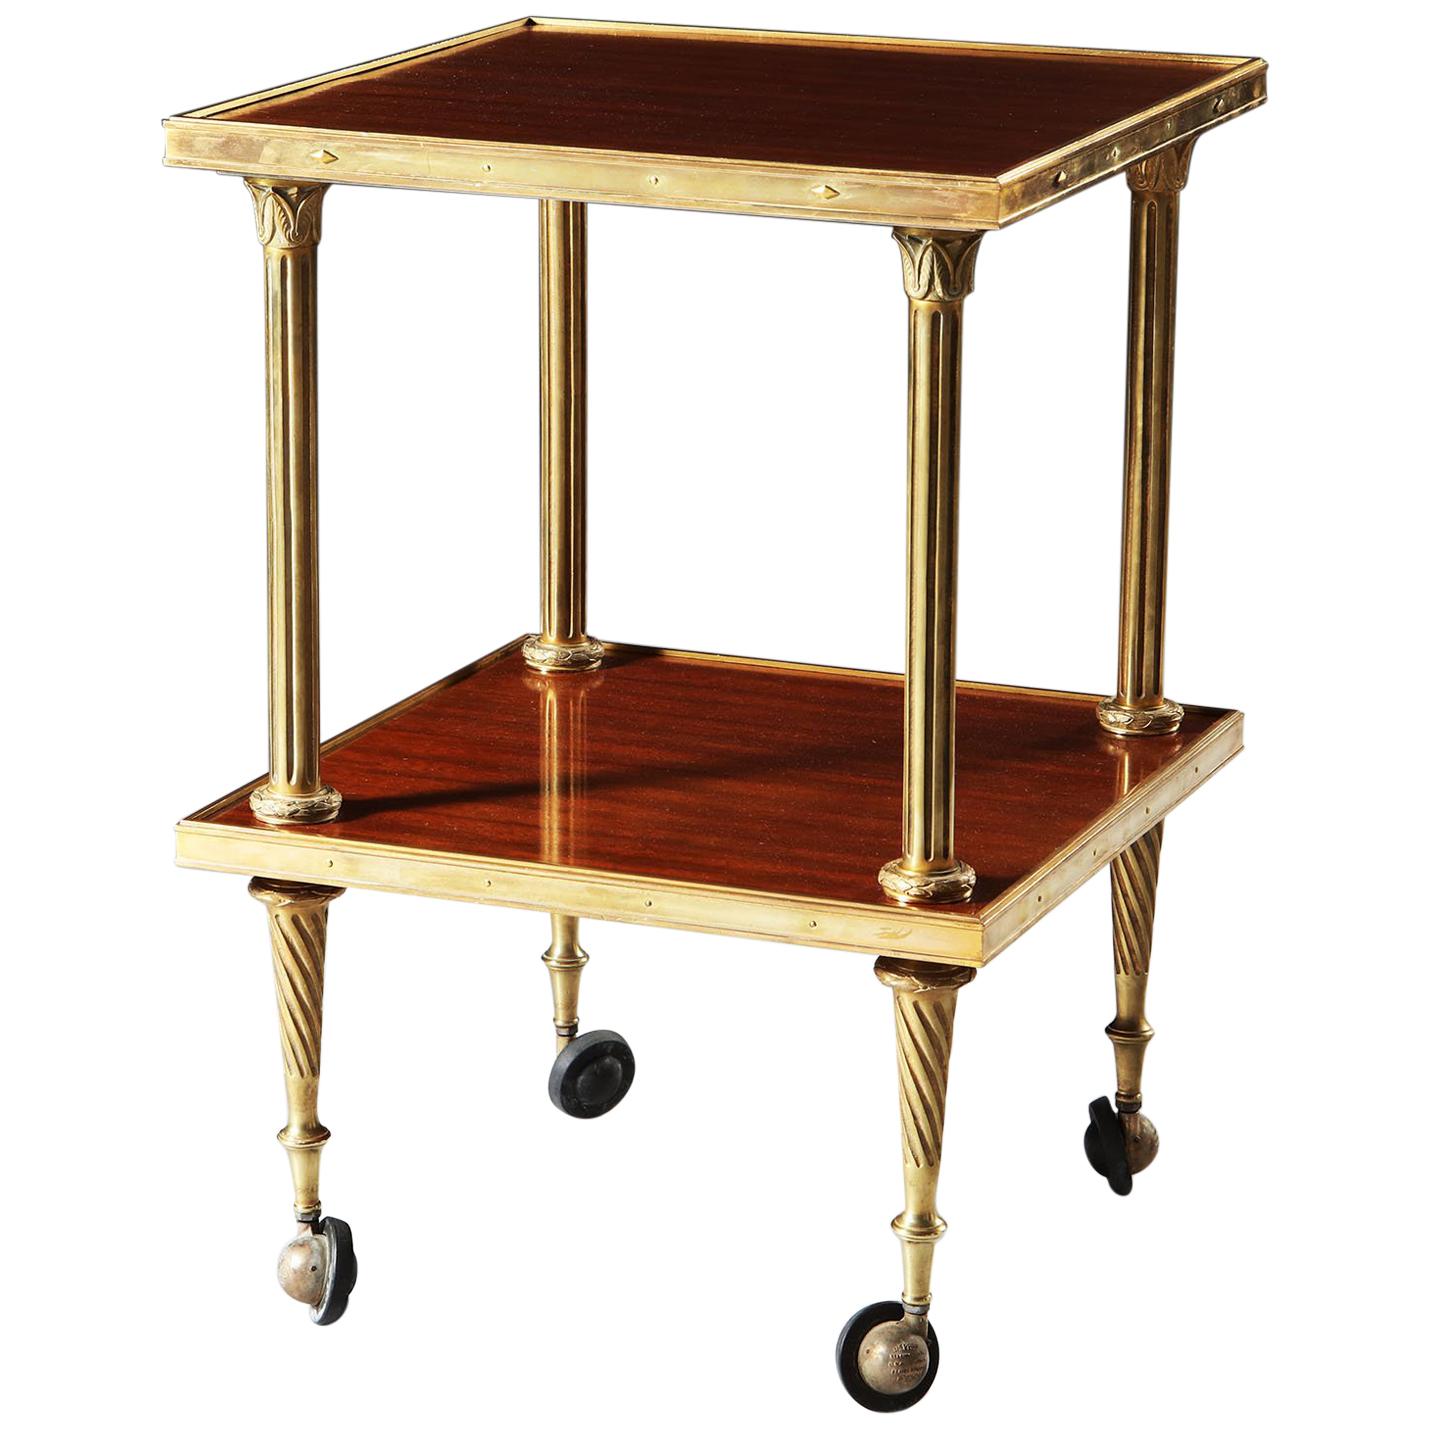 20th Century Brass & Mahogany Étagère or Trolley with Wheels, Maison Jansen